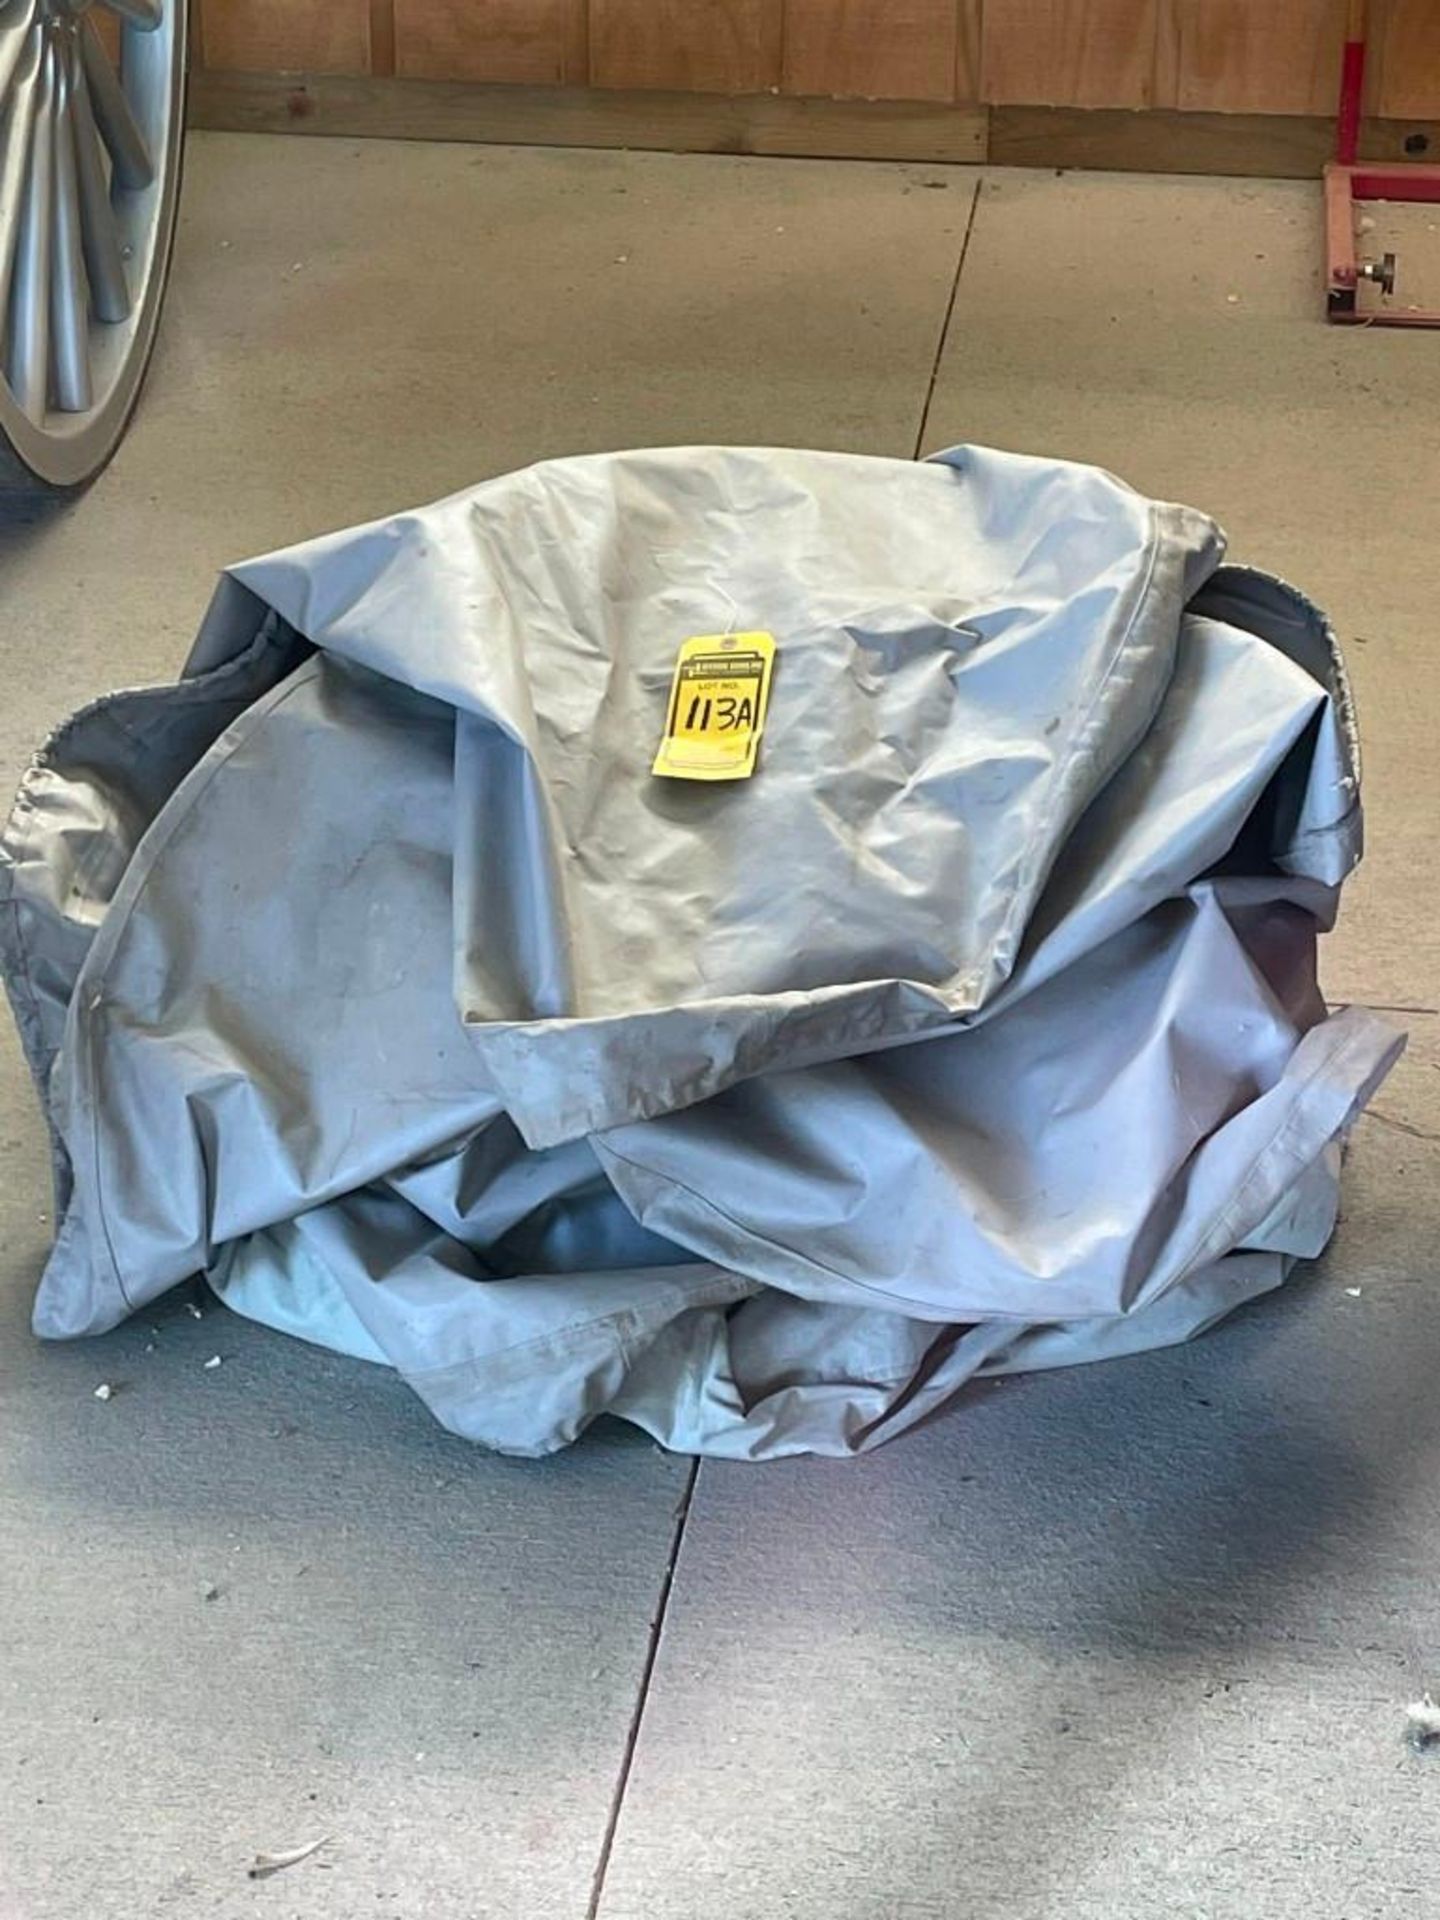 Full Covering Tarps for lot 113, Incl. Wheel Covers and full Wagon Cover